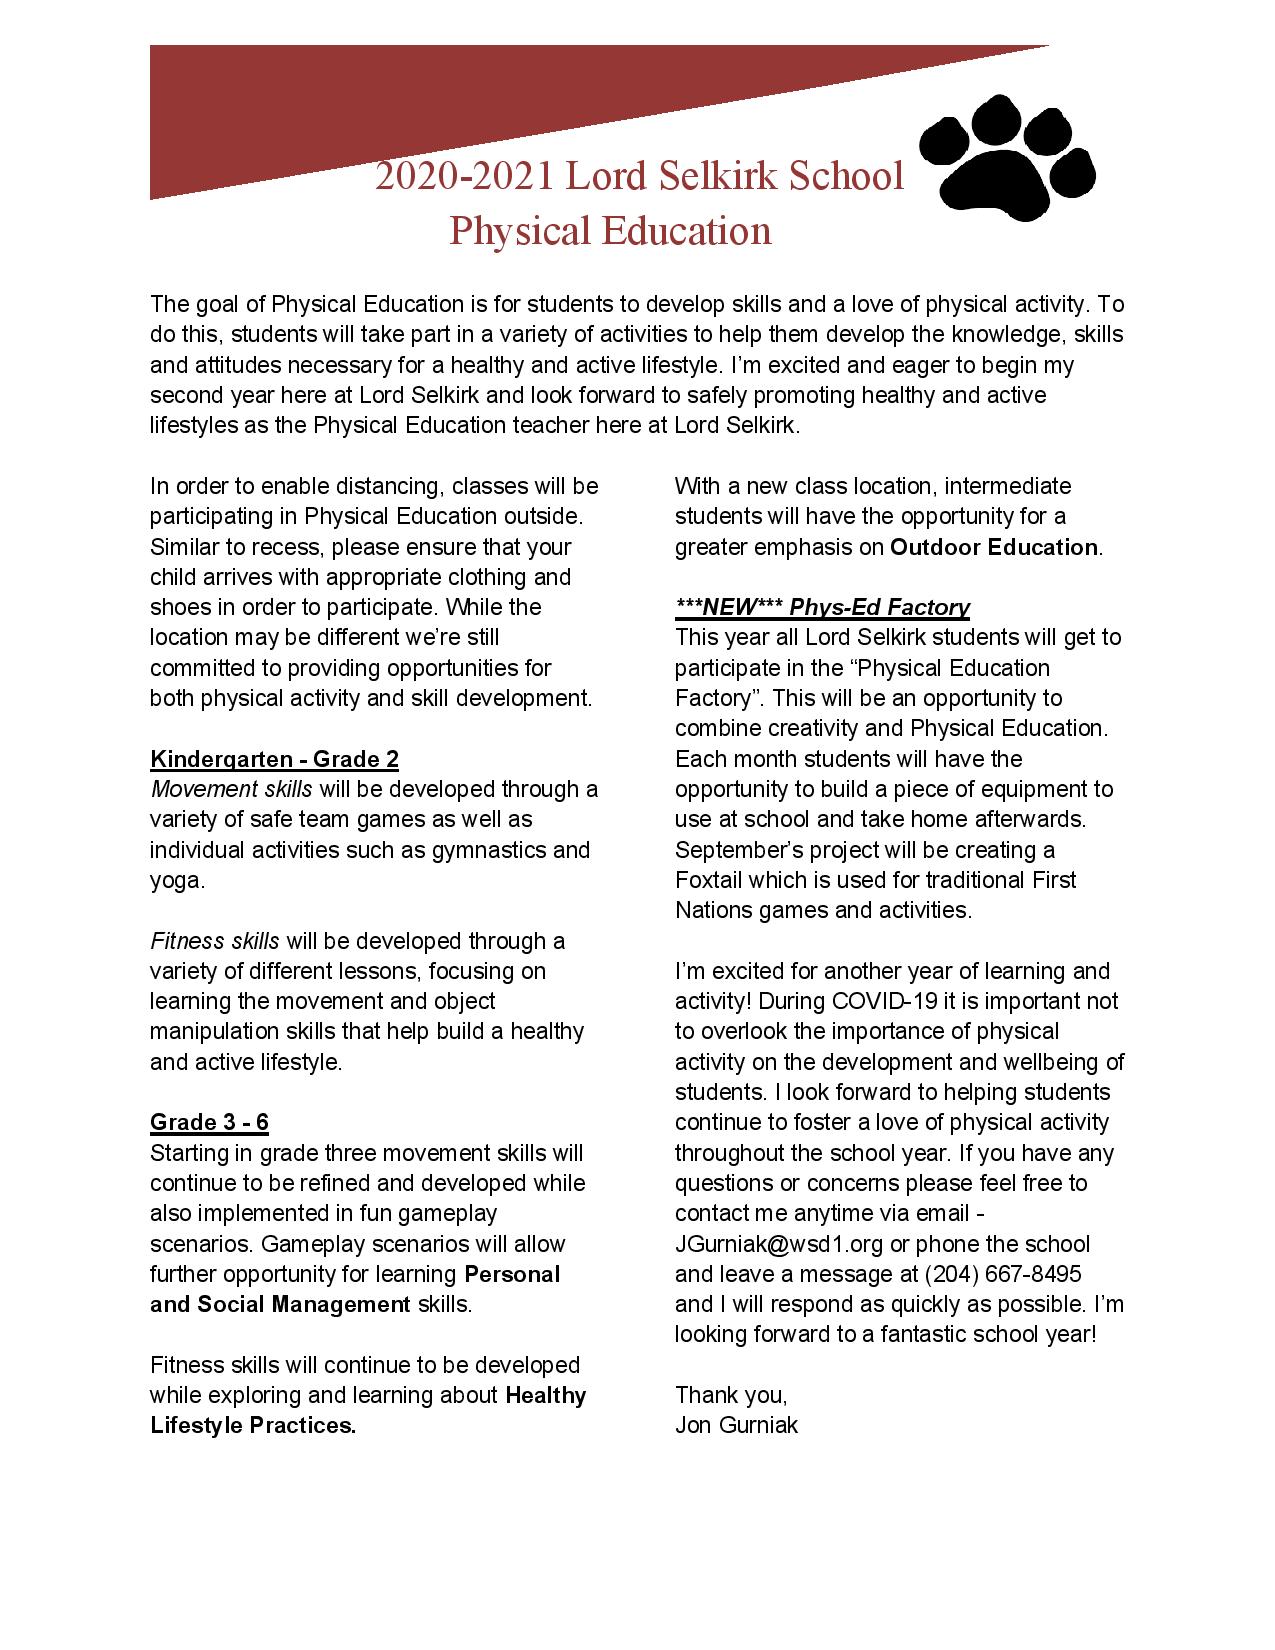 Phys. Ed Overview updated-page-001.jpg